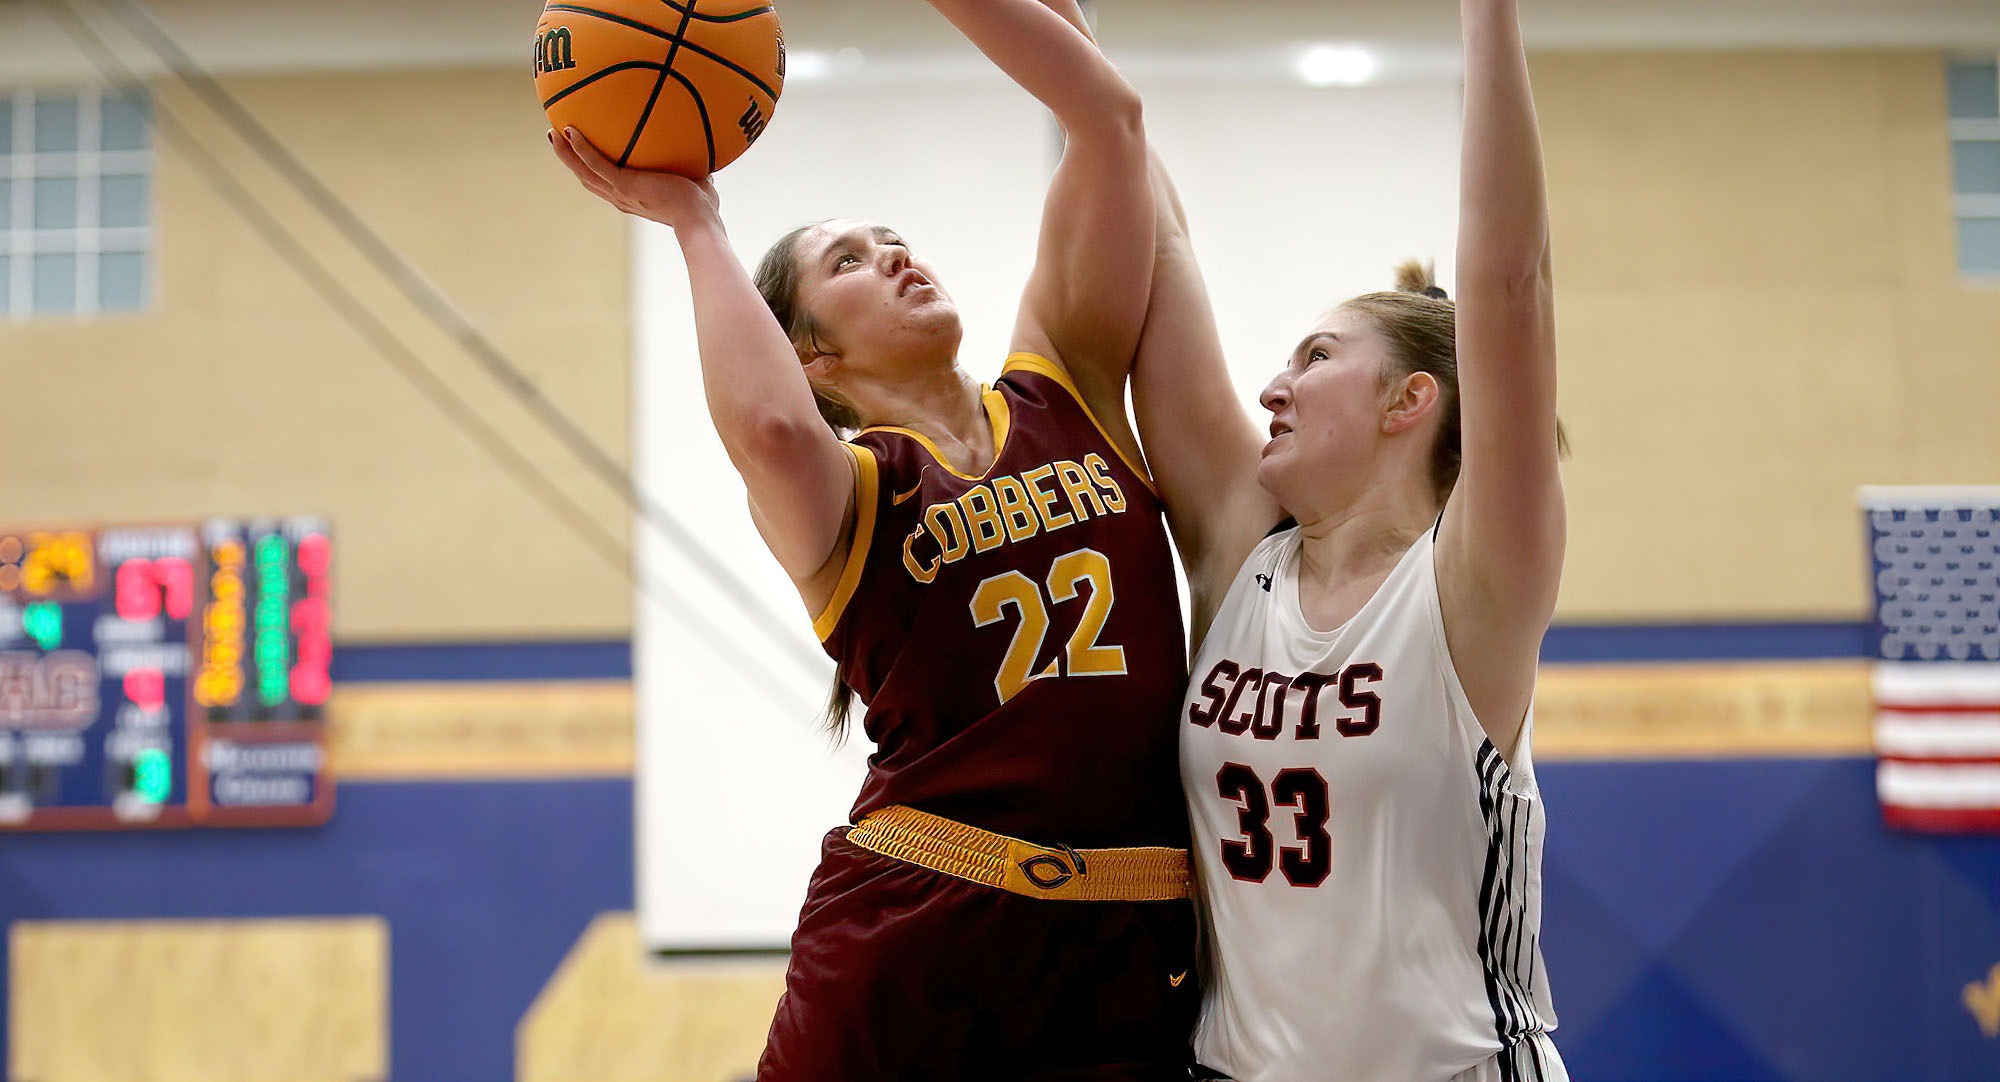 Makayla Anderson goes up for two of her 14 points in the Cobbers' win over Macalester. (Photo courtesy of Ryan Coleman, D3photography)